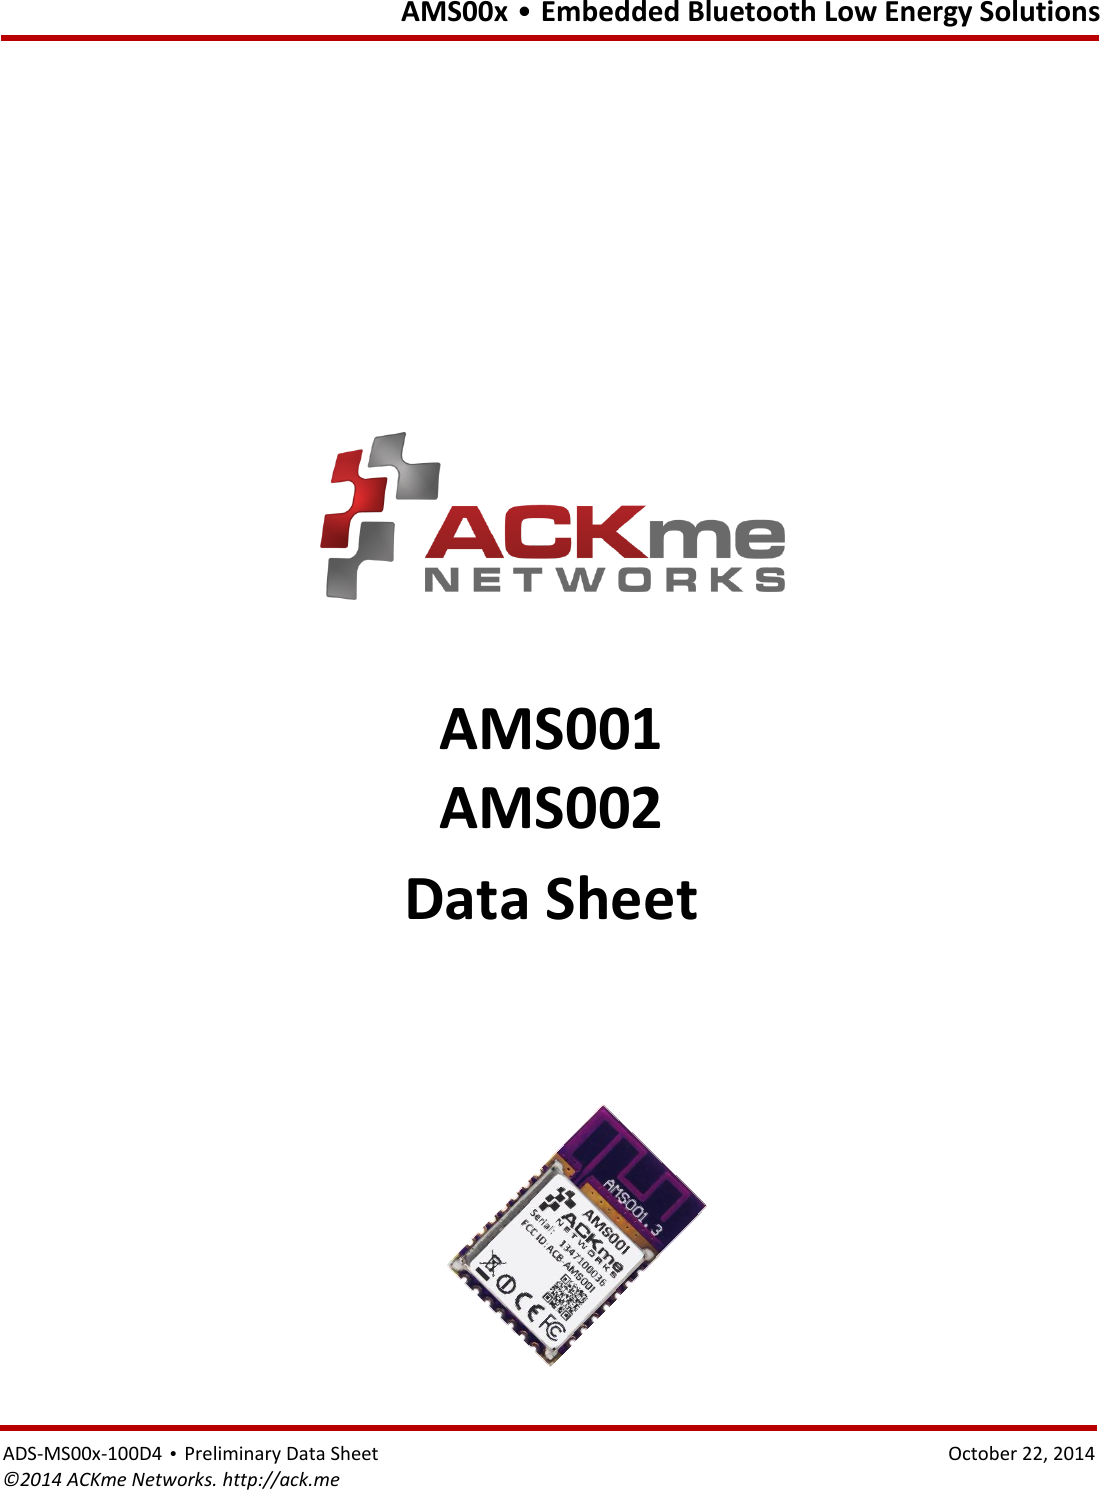   AMS00x • Embedded Bluetooth Low Energy Solutions ADS-MS00x-100D4 • Preliminary Data Sheet    October 22, 2014 ©2014 ACKme Networks. http://ack.me                   AMS001 AMS002 Data Sheet  